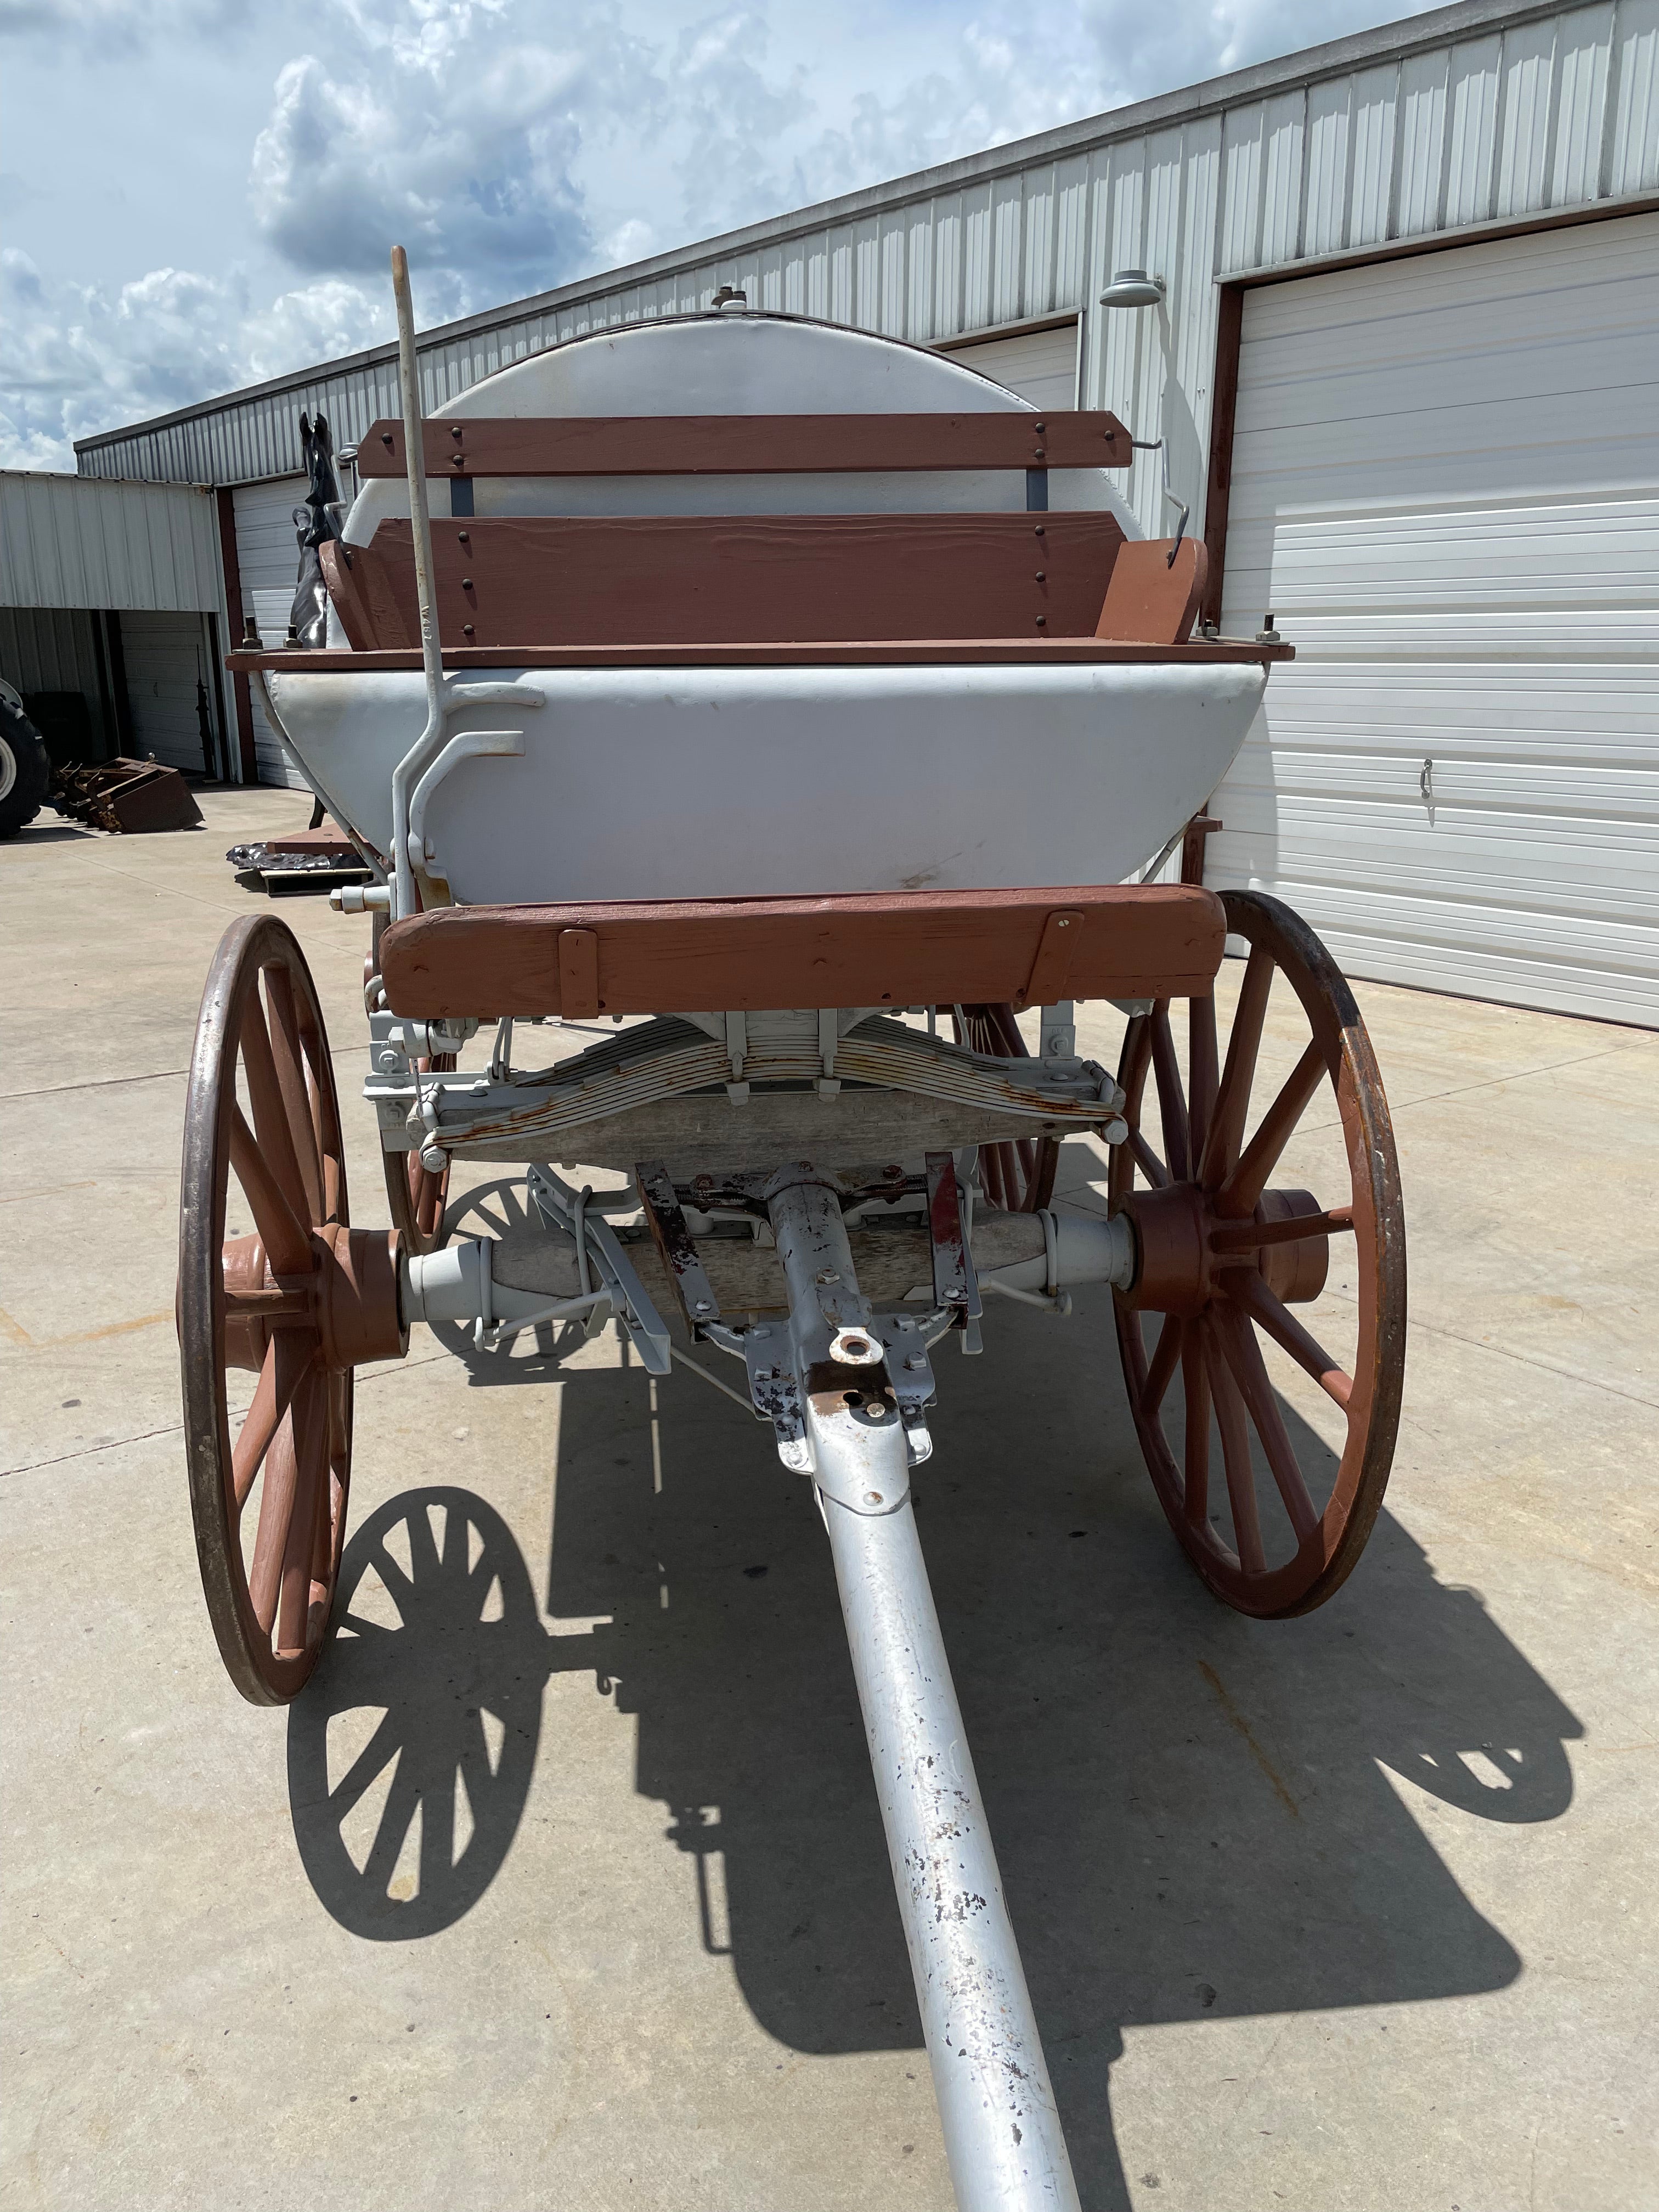 SOLD-Horse Drawn Standard Oil Fuel Delivery Wagon